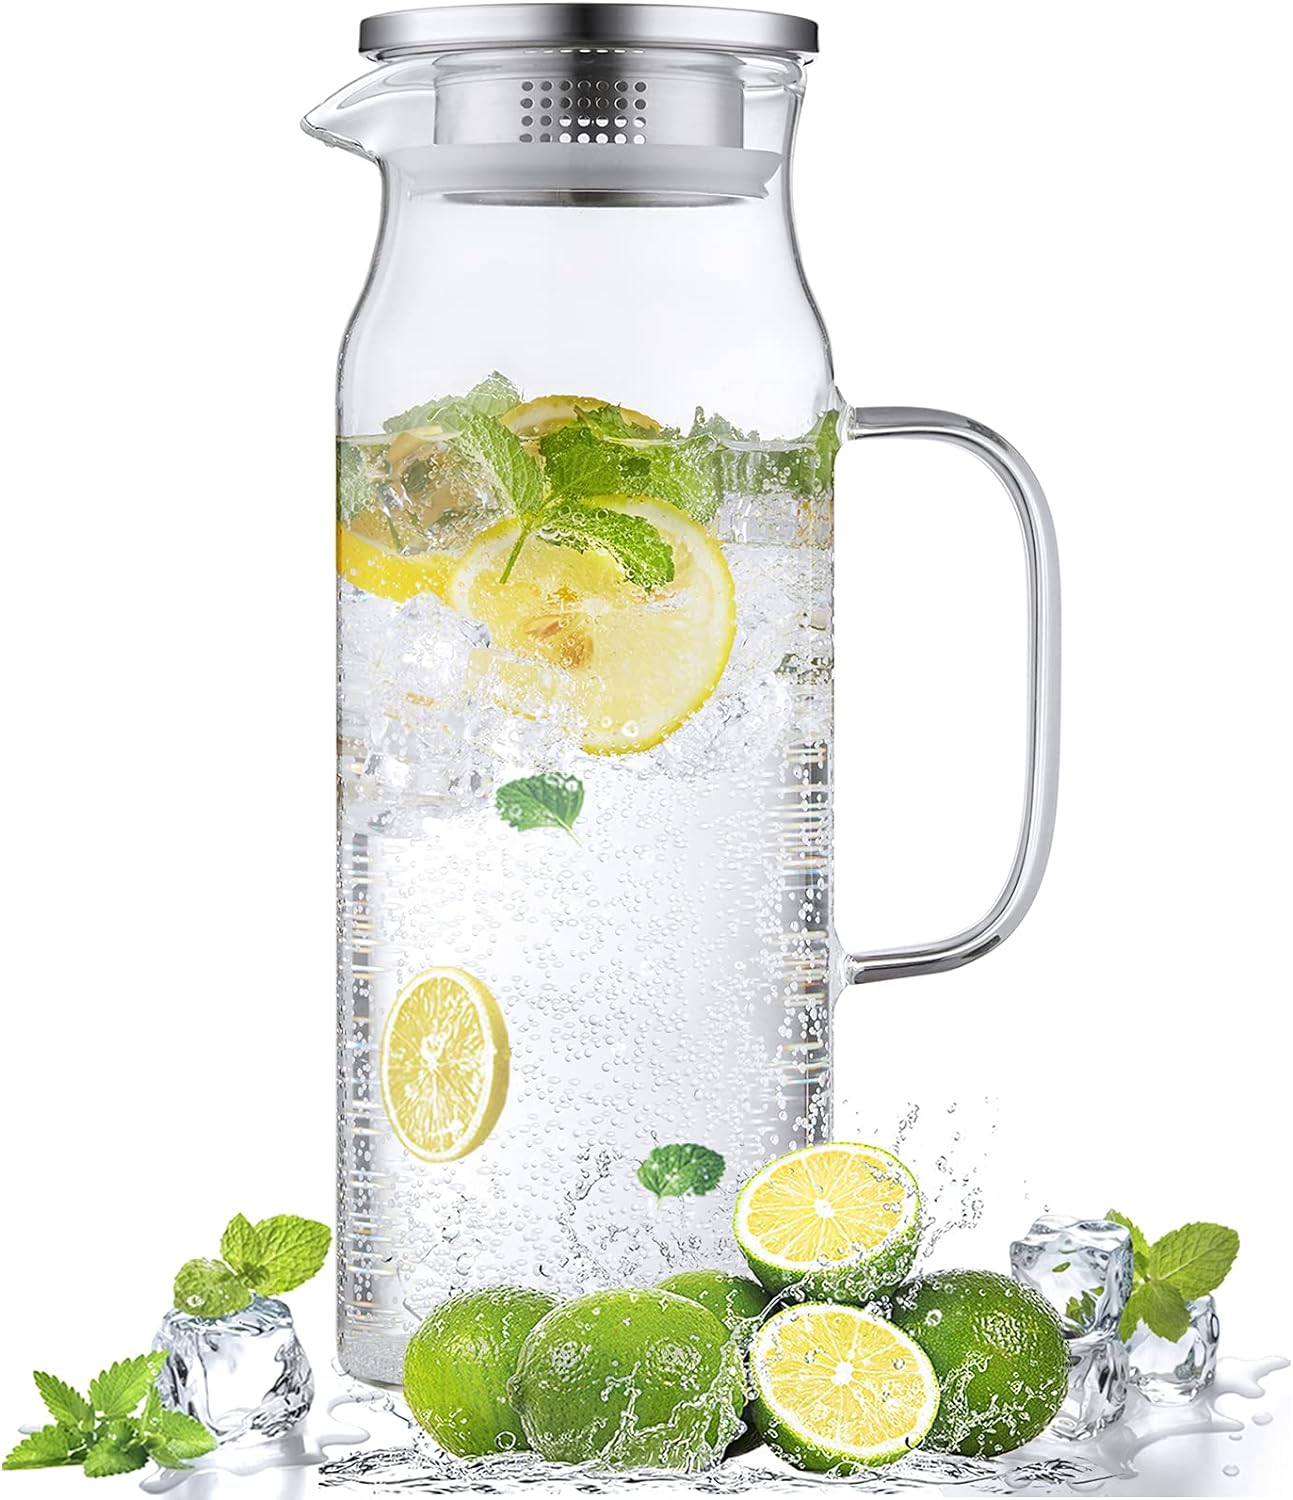  6 Pack Large 50 Oz Water Carafe with White Flip Top Lid, Clear  Plastic Juice Jar Containers, Mimosa Bar Beverage Pitcher BPA Free - for  Water, Iced Tea, Juice, Lemonade, Milk